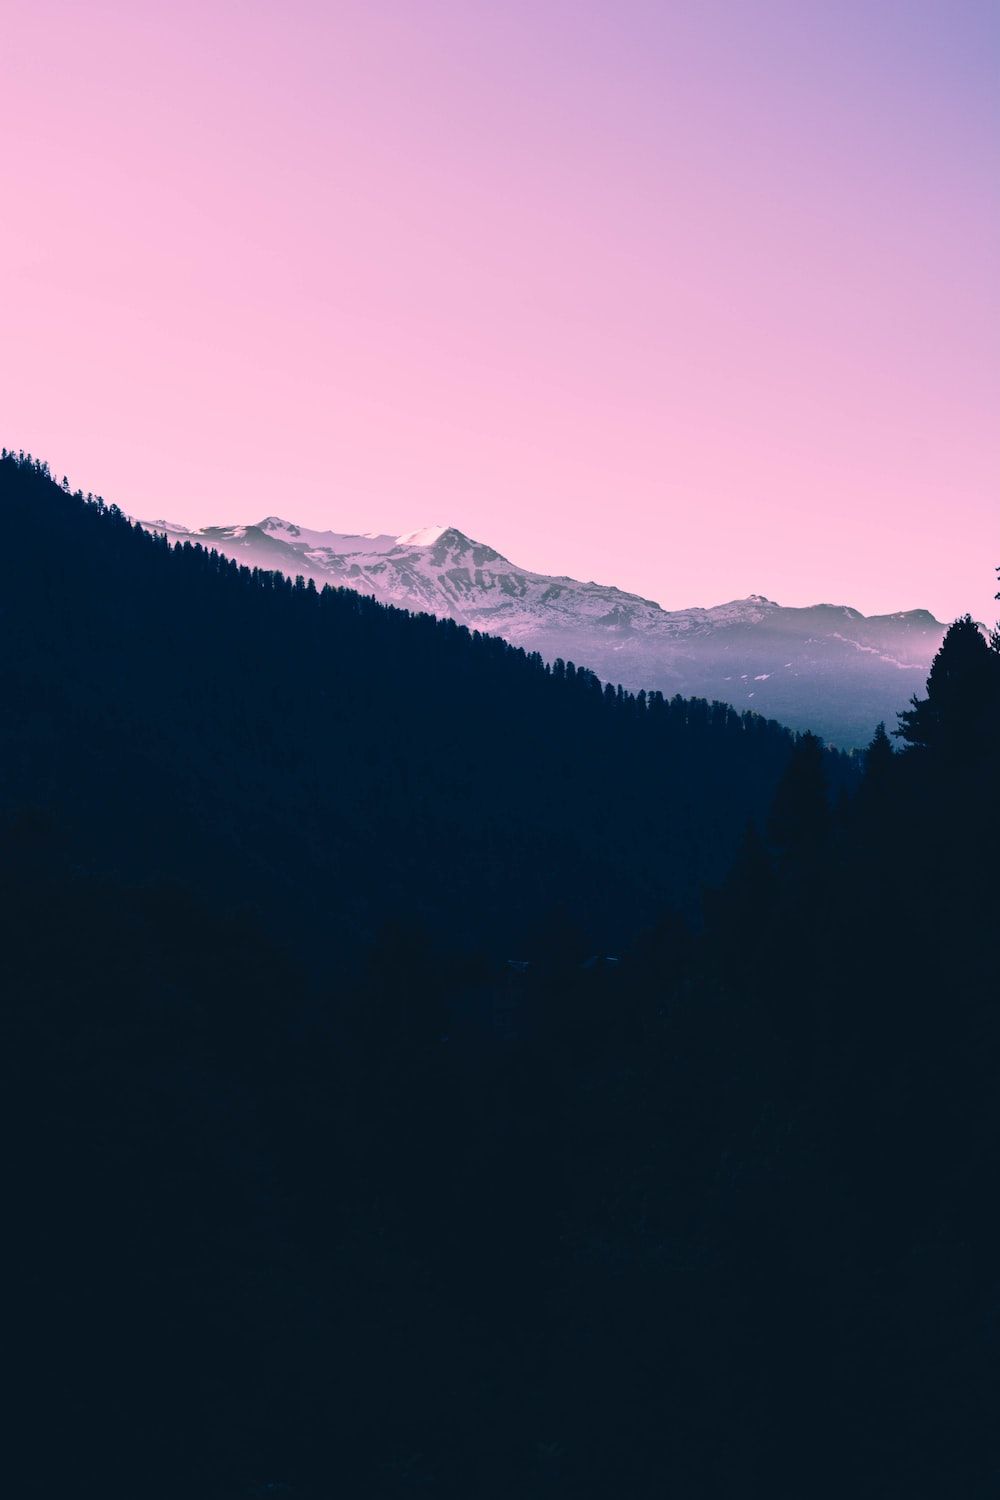 Silhouette of mountain during golden hour - Landscape